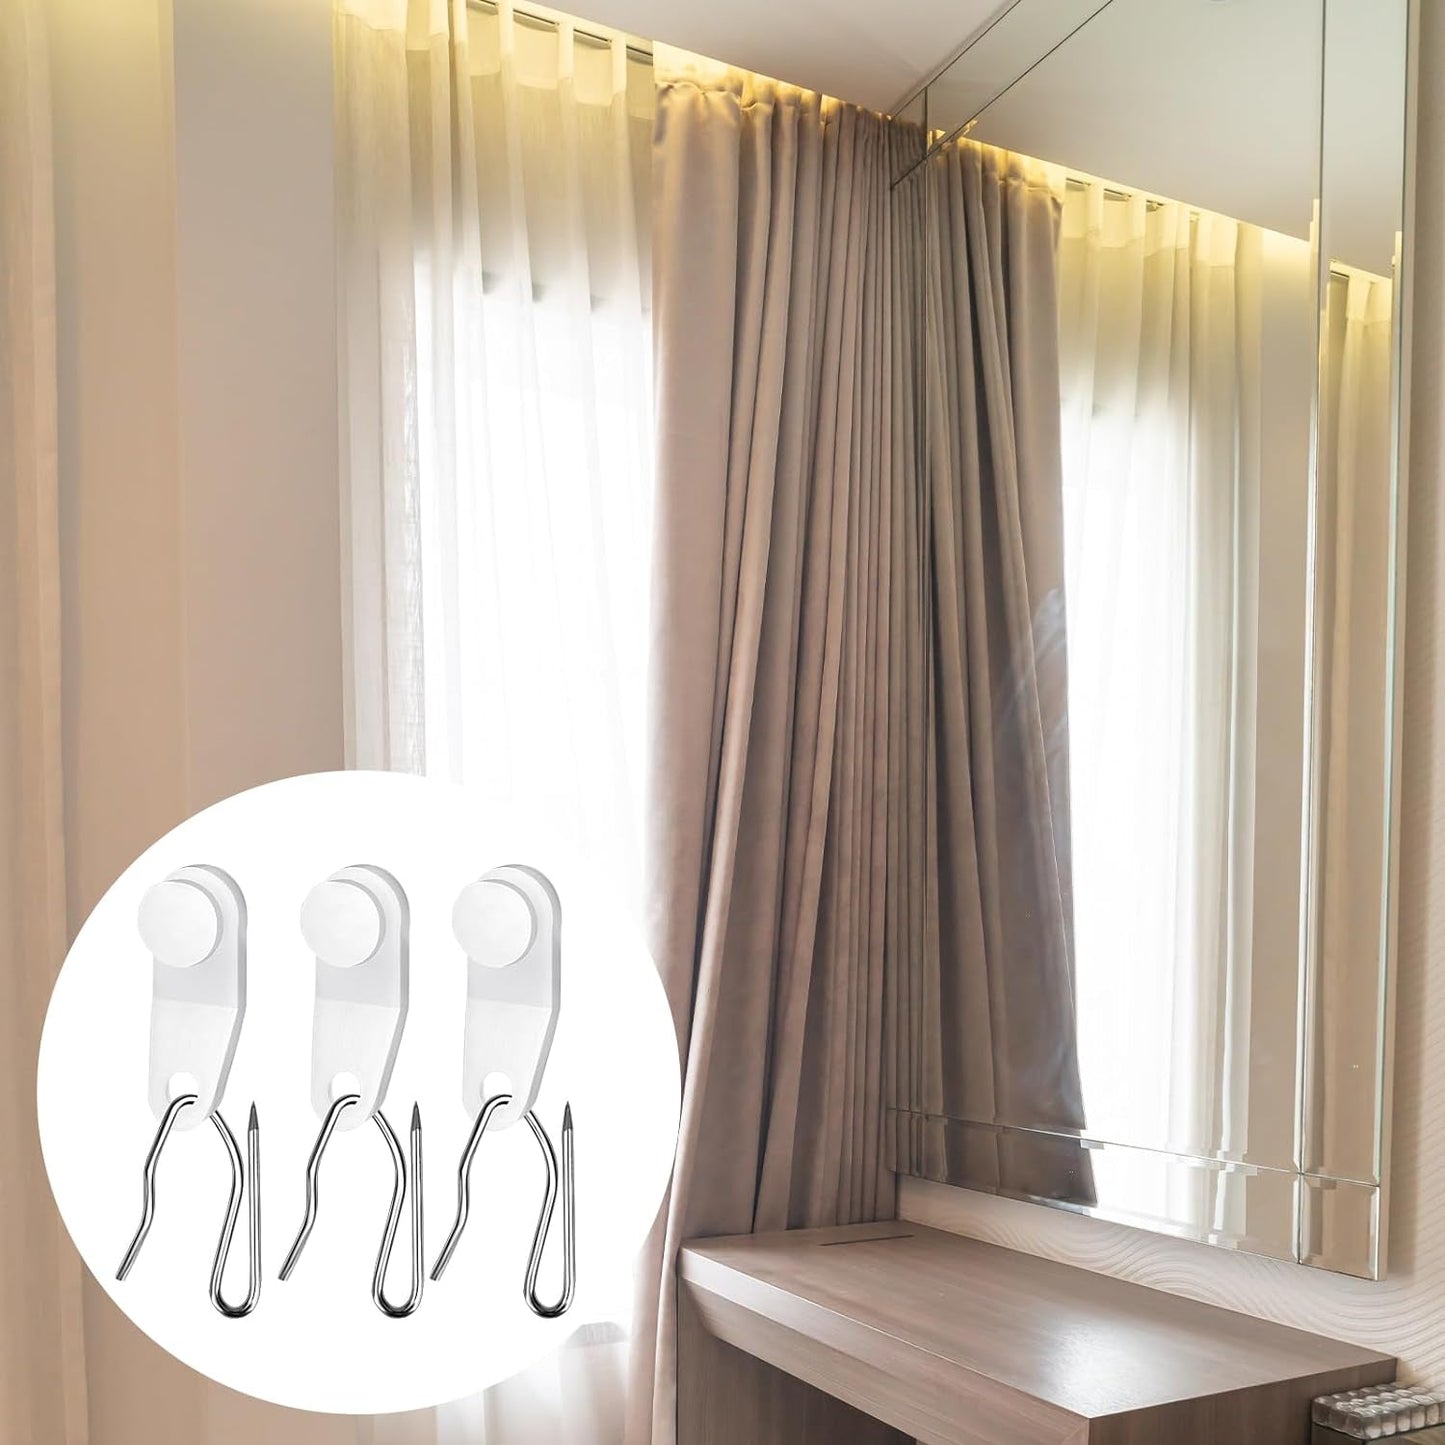 50Sets White Traverse Rod Slides Curtain Track Glider Hooks for Curtains, Drapery Hook for Curtains Traverse Curtain Rods Accessories, Plastic Curtain Hooks and Metal Curtain Hooks Window Curtain